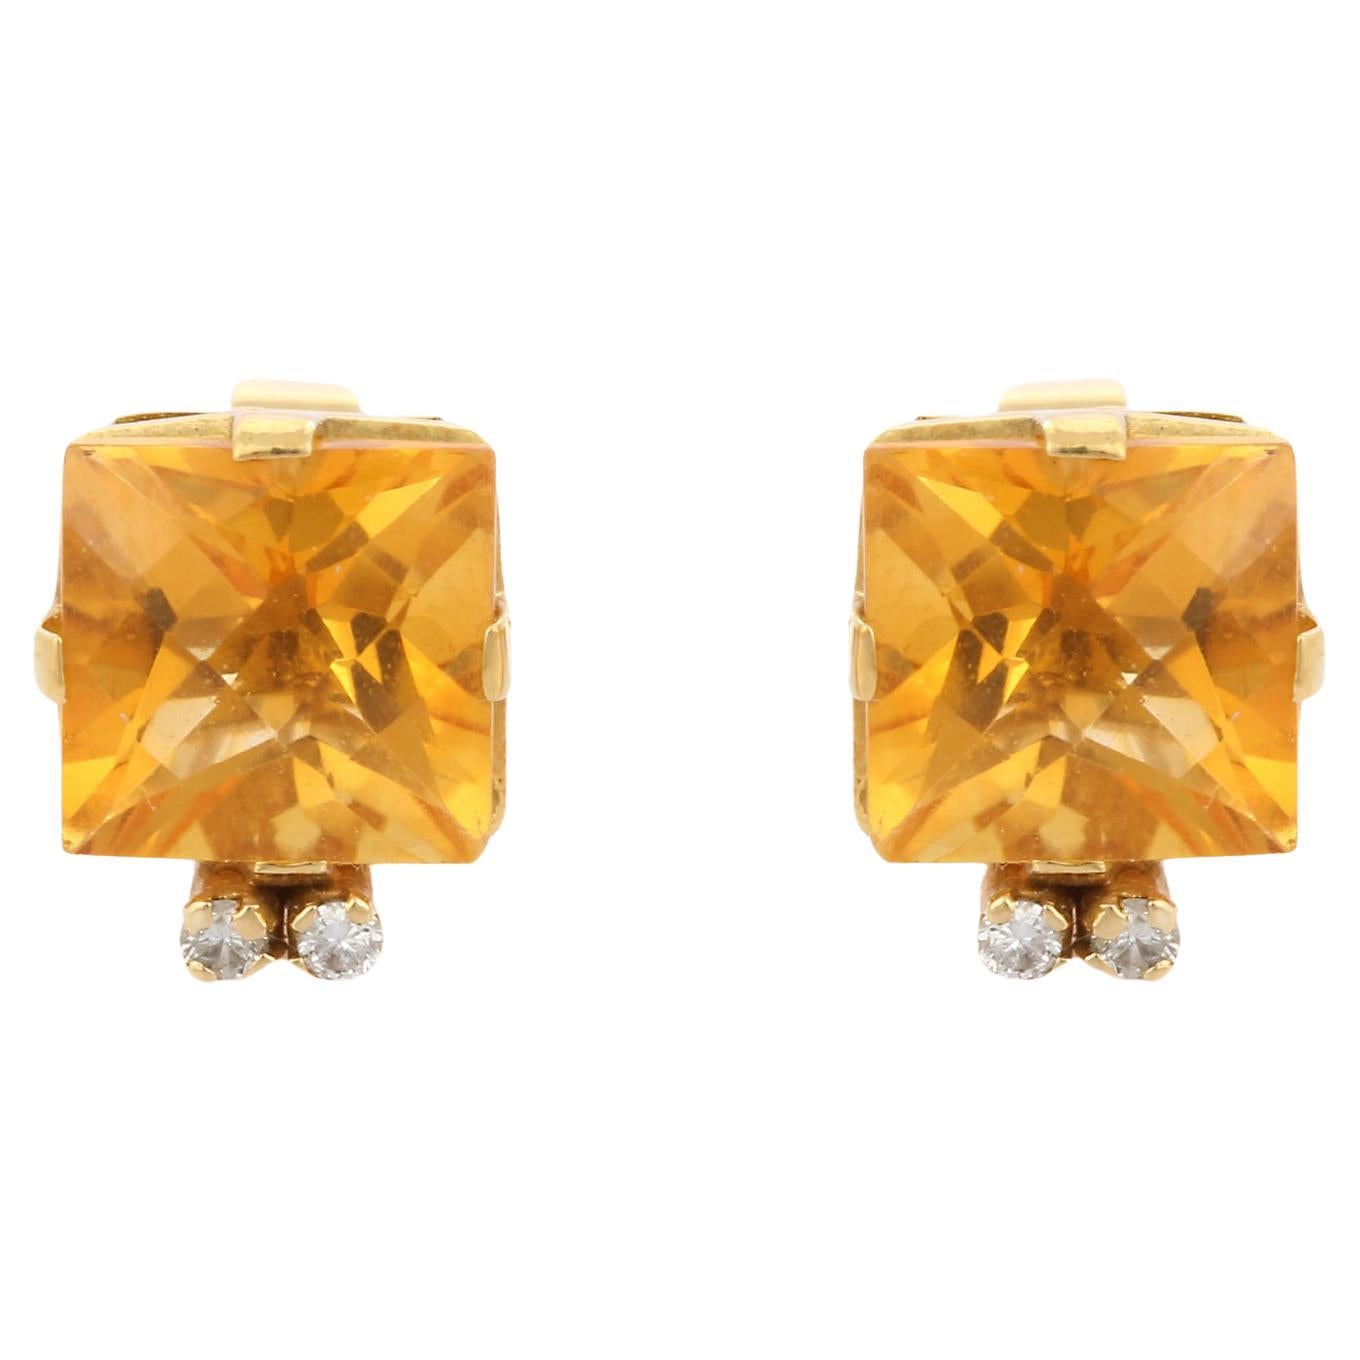 5.31 Ct Citrine Diamond Stud Earrings in 18K Yellow Gold For Sale